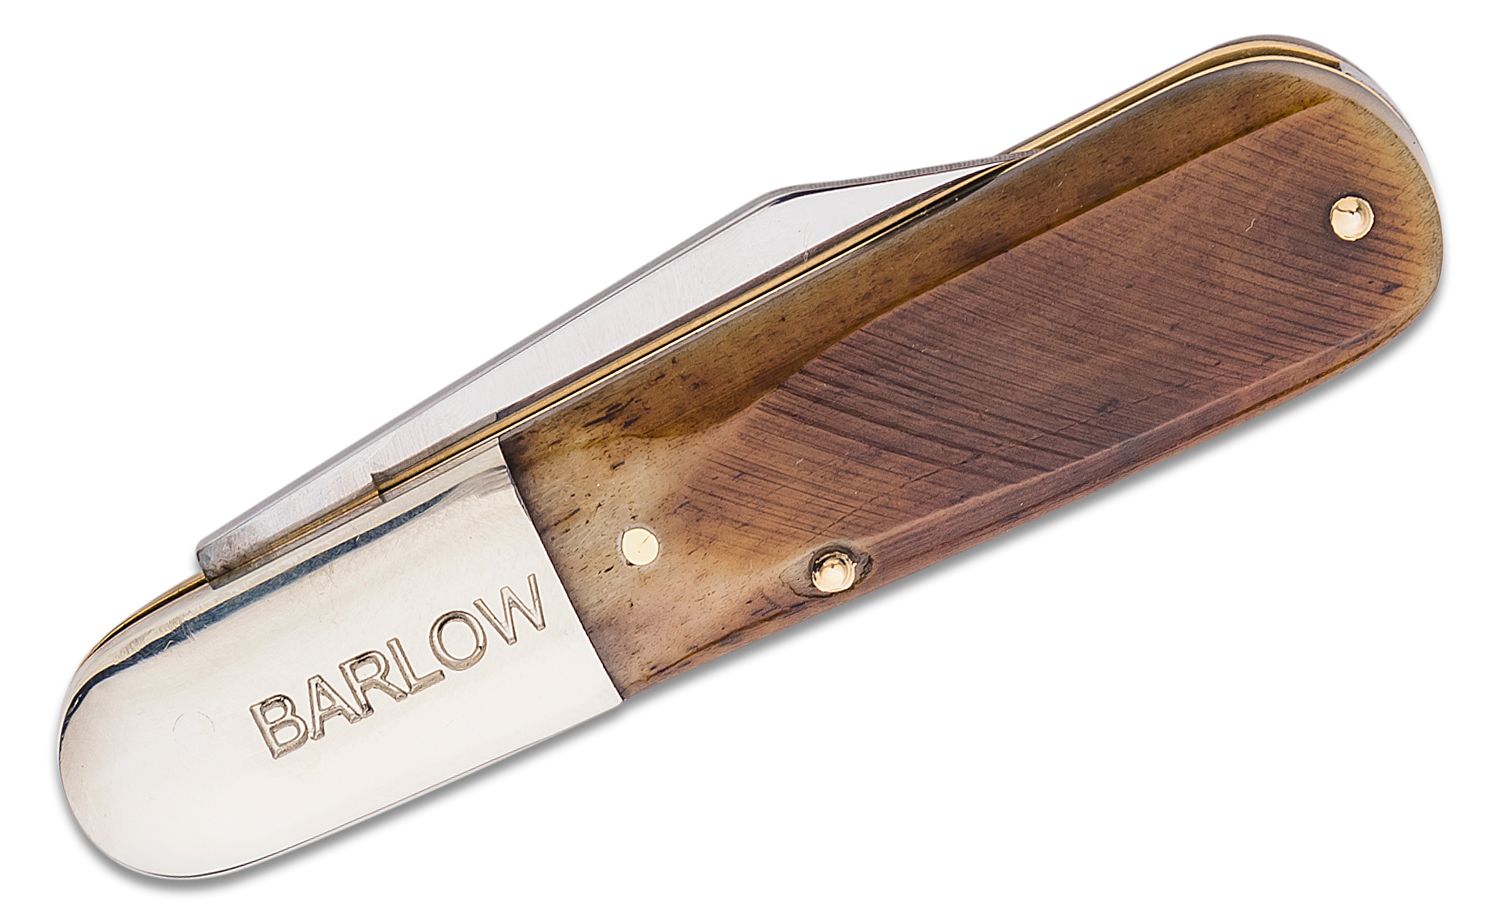 Barlow Style Pocket Knife - Bone or Horn Handle with Shield - South Union  Mills